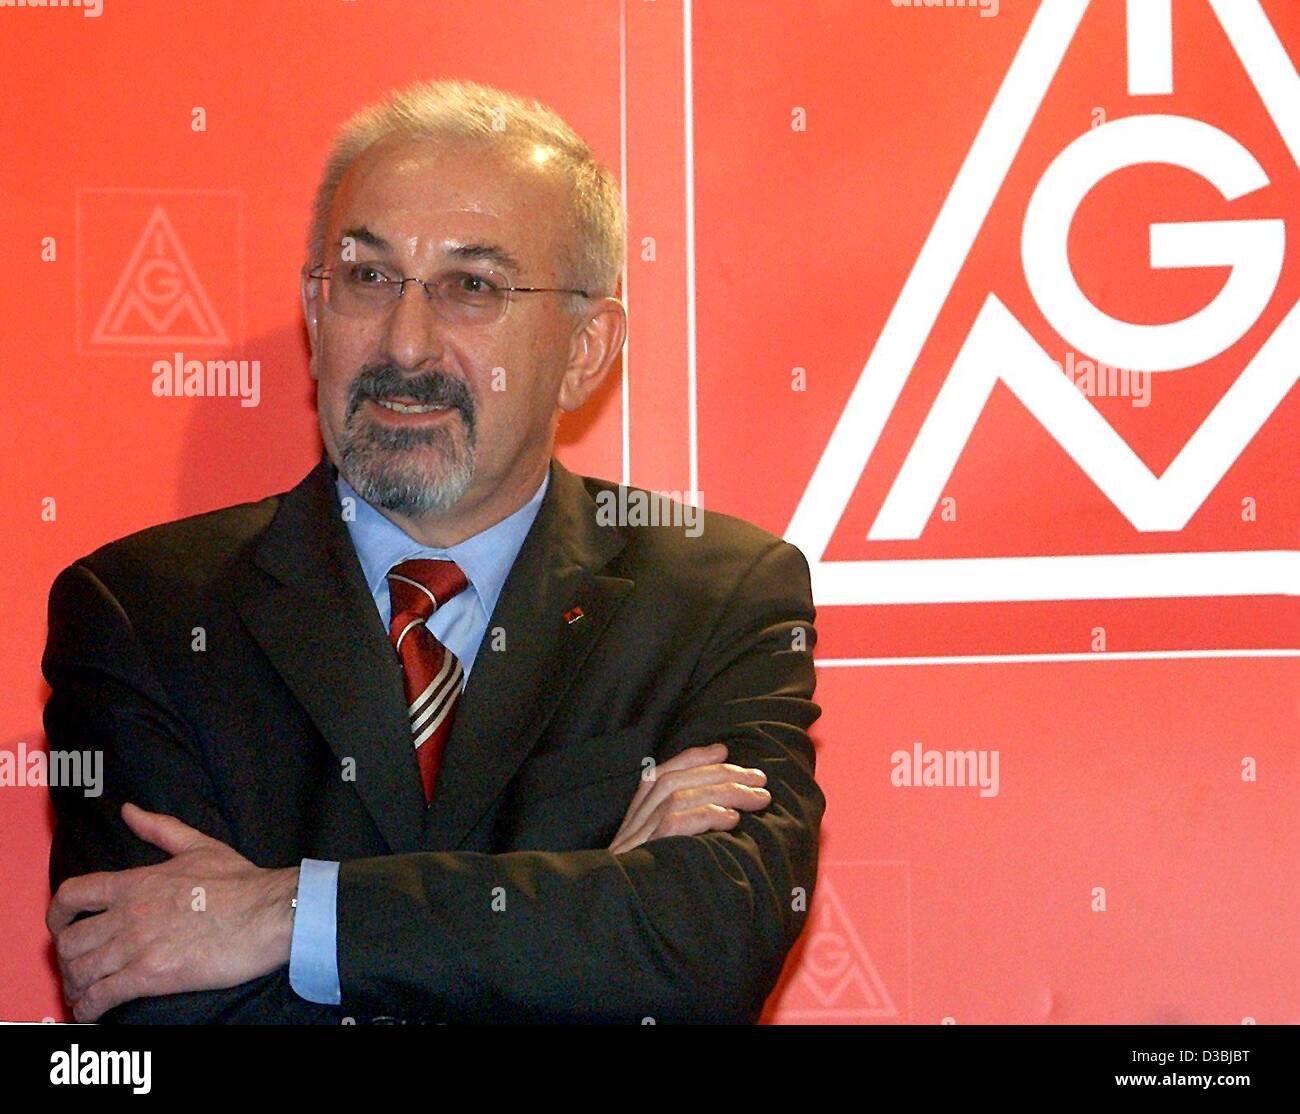 (dpa) - Juergen Peters, presently Vice President of the German metal worker's trade union IG Metall, was nominated candidate for this year's election of a new president, pictured in front of the union's logo at a press conference in Dresden, Germany, 8 April 2003. The election will be held in six mo Stock Photo